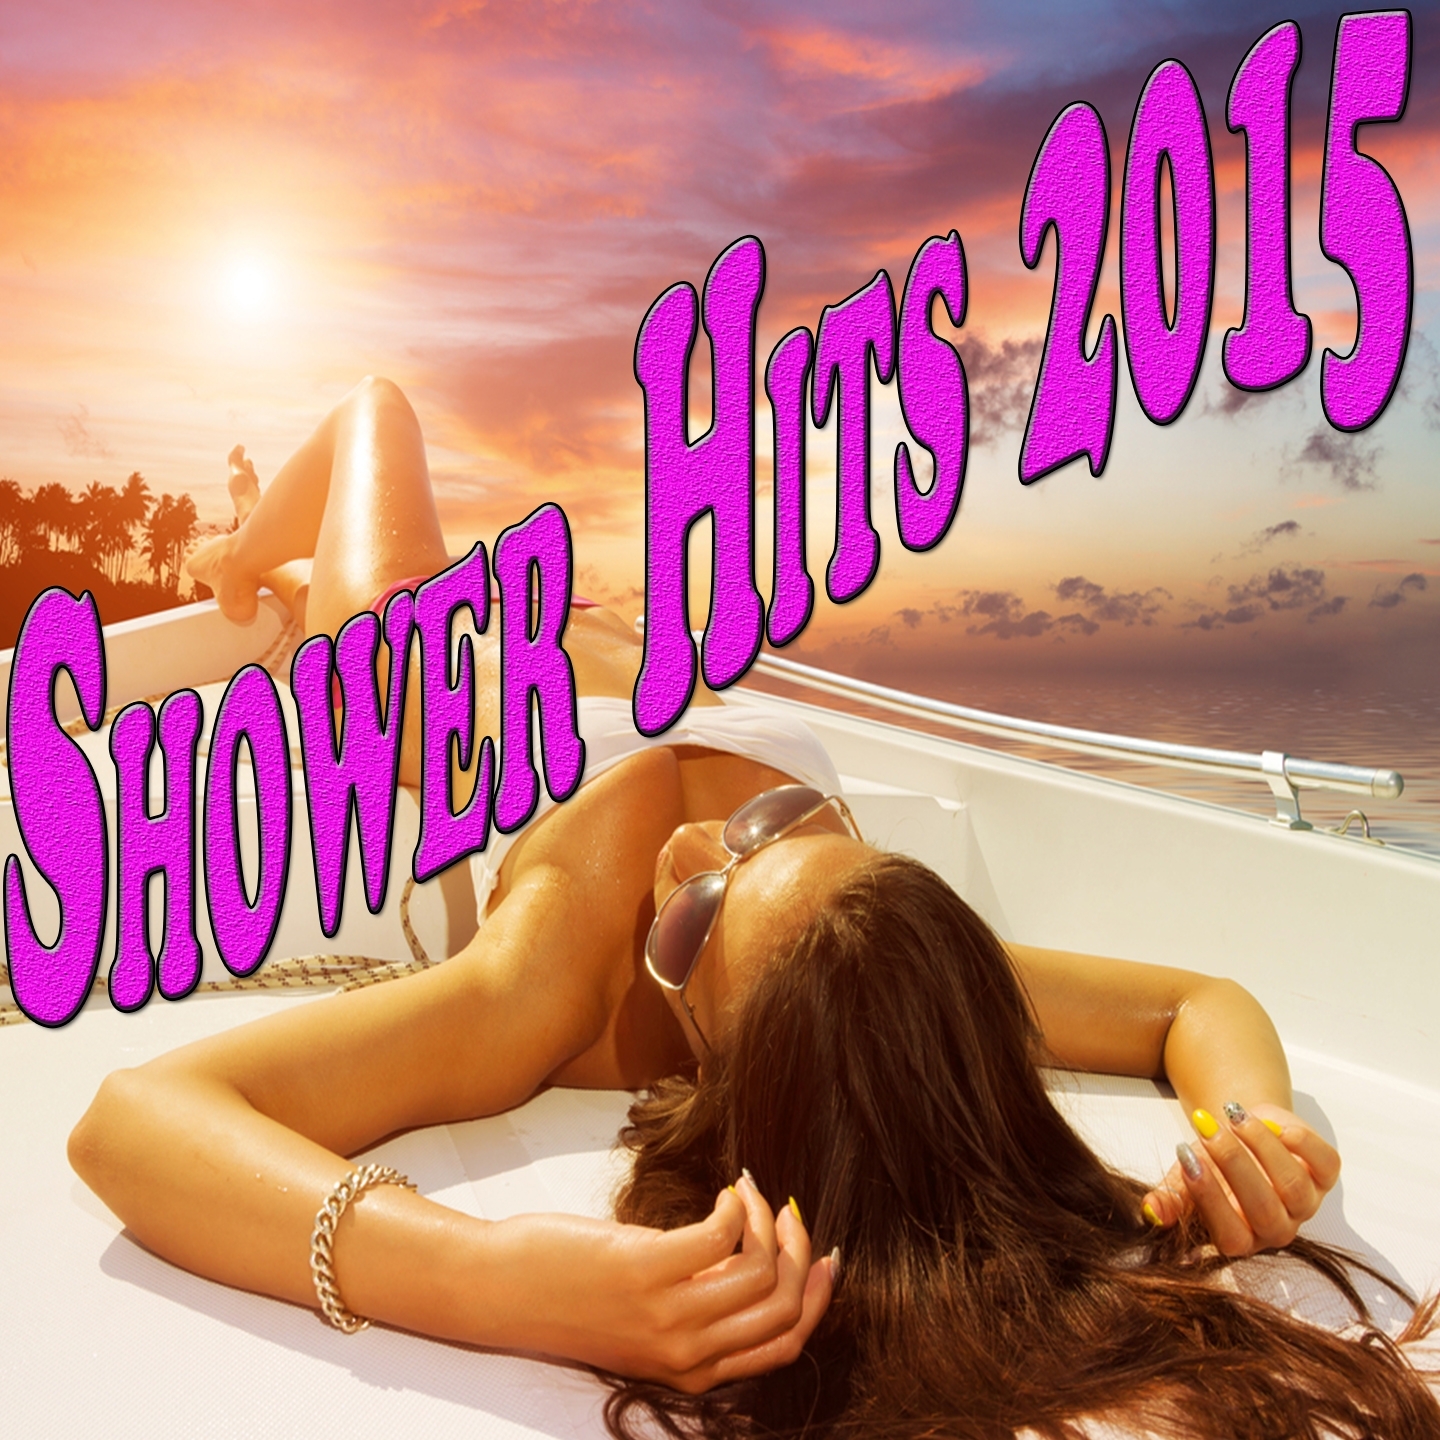 Shower Hits 2015